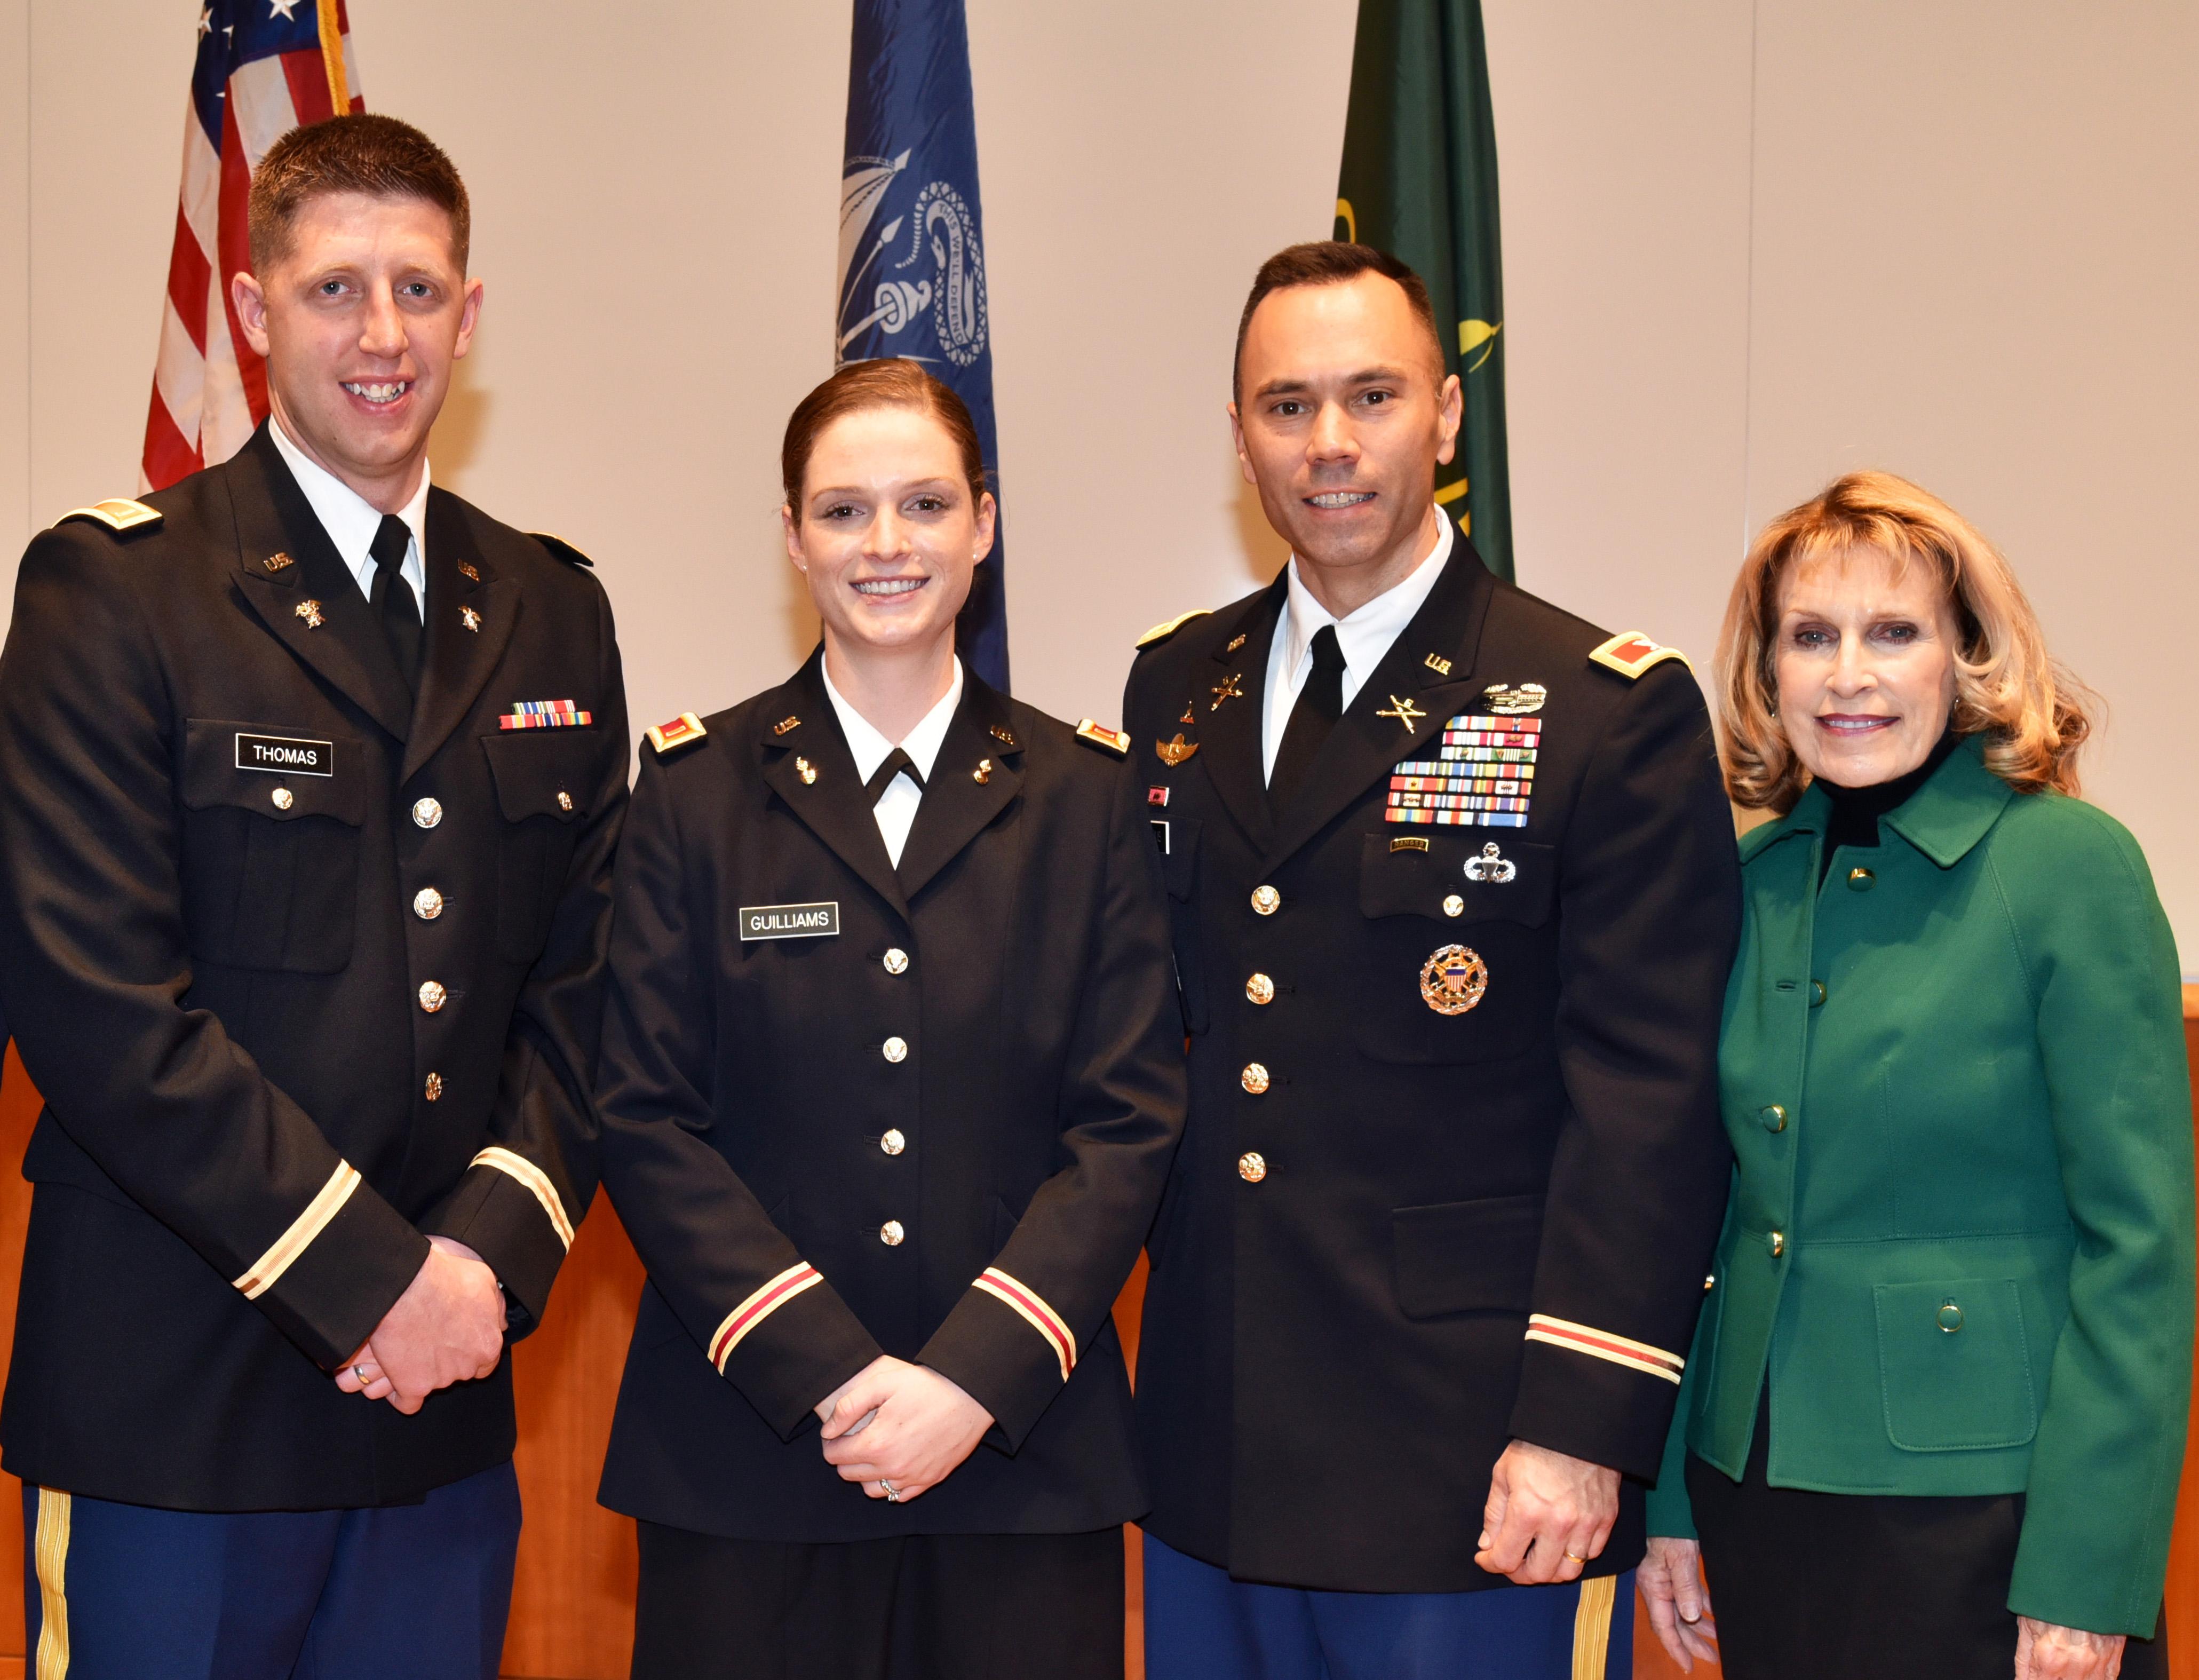 Two SUNY Oswego ROTC students each received U.S. Army commissions in December 2019 